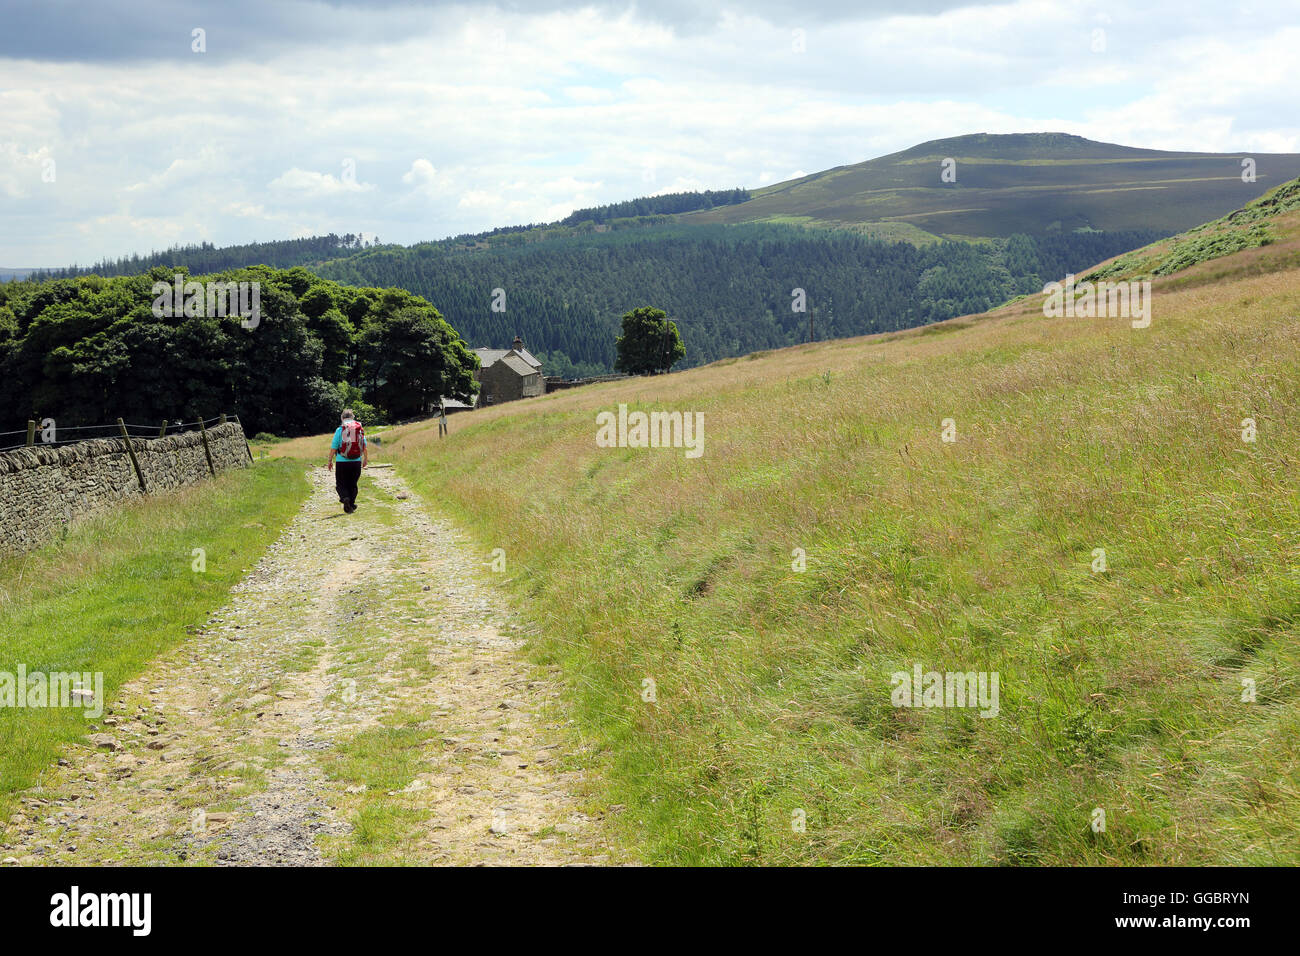 Female hiker walking along the path round Crook HIll, which can be seen rising to the right, in the Peak District, England, UK Stock Photo